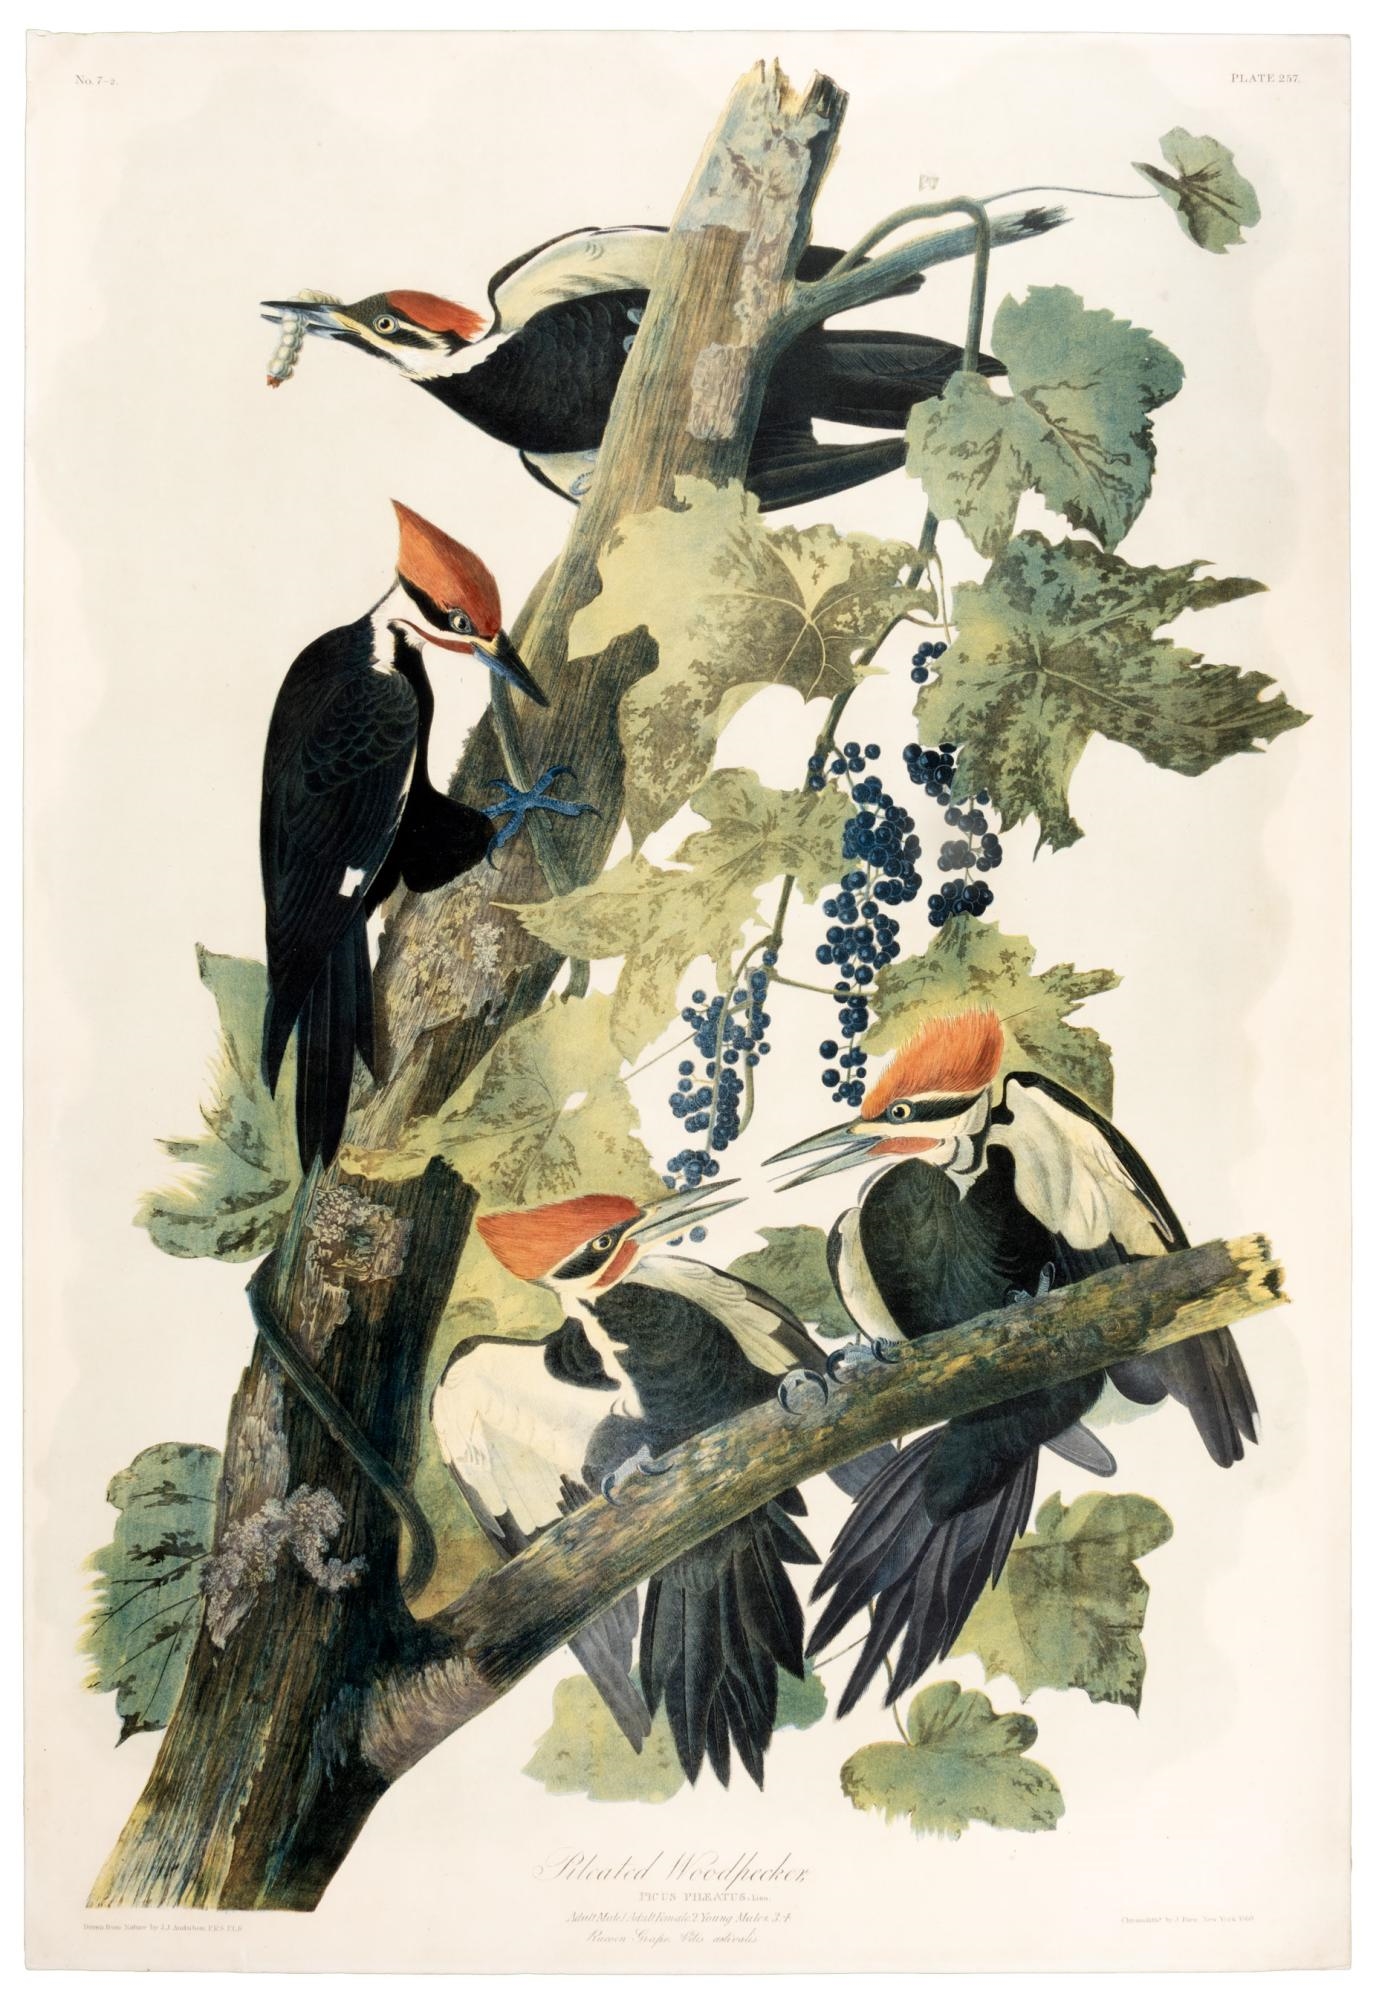 Pilated Woodpecker, Picus Pileatus. Linn, Adult Male, 1. Adult Female, 2. Young Males 3, 4. Racoon Grape Vitus Astivalis by John James Audubon, 1860